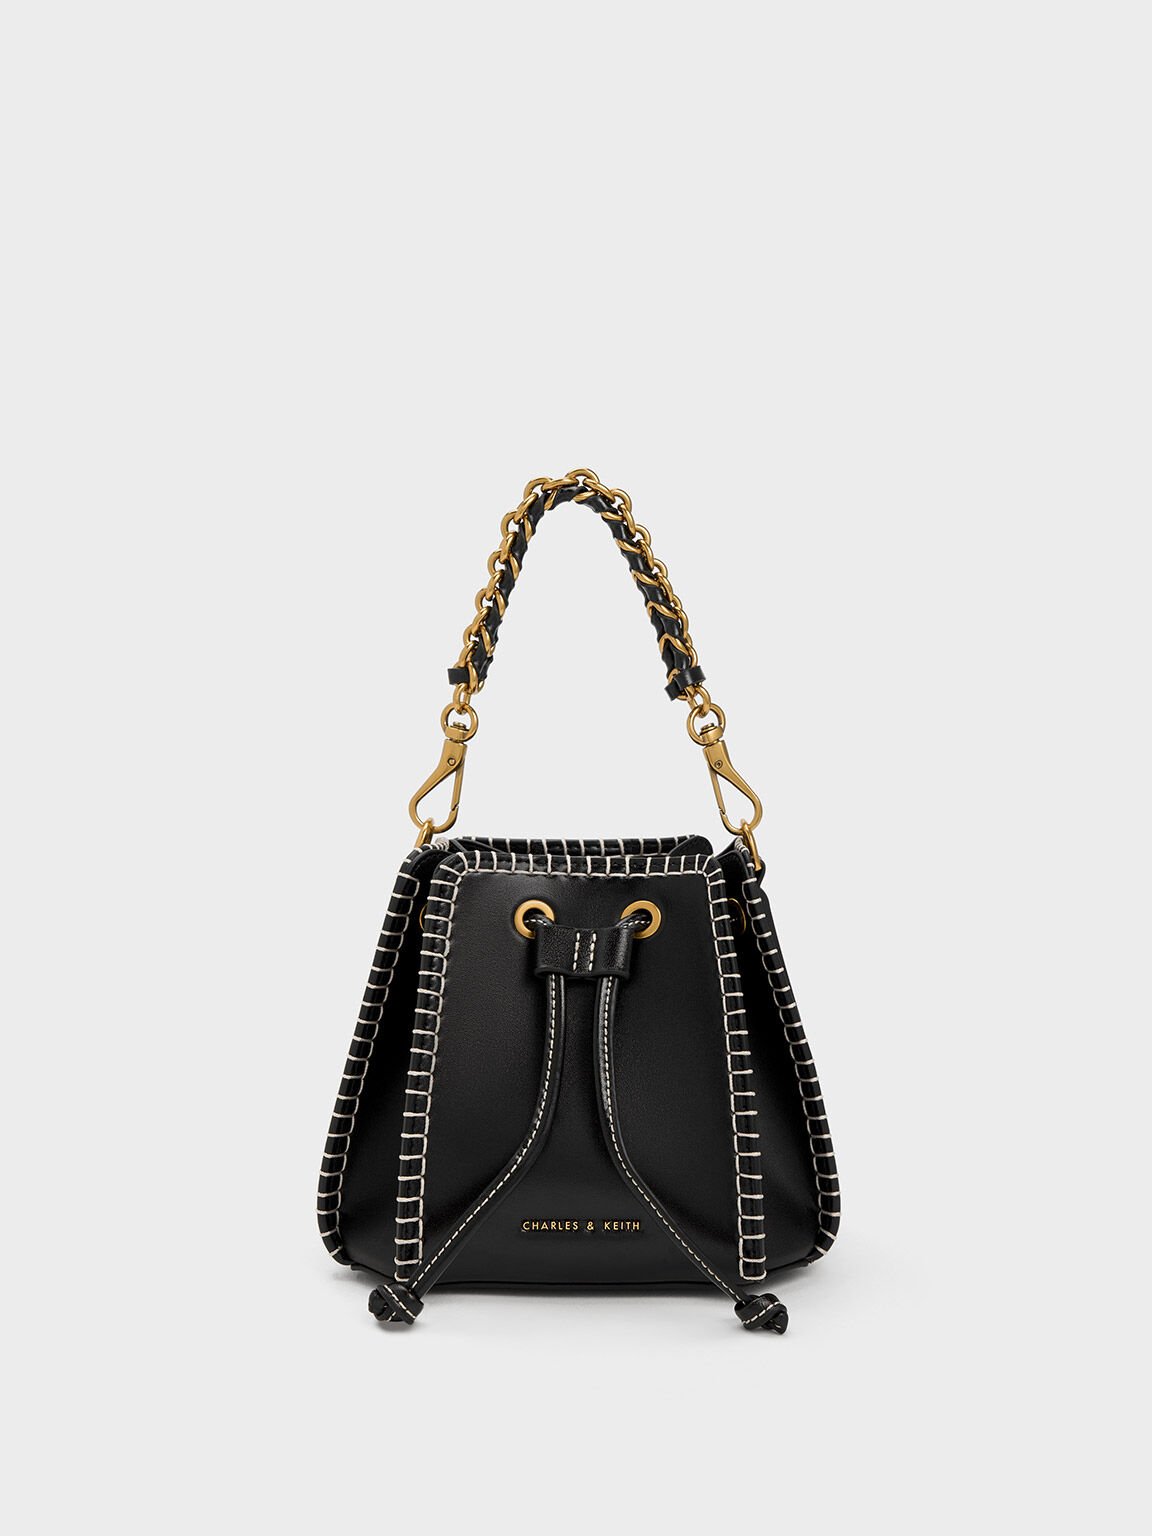 7 GREAT DESIGNER BUCKET BAG To Consider For Your Collection 